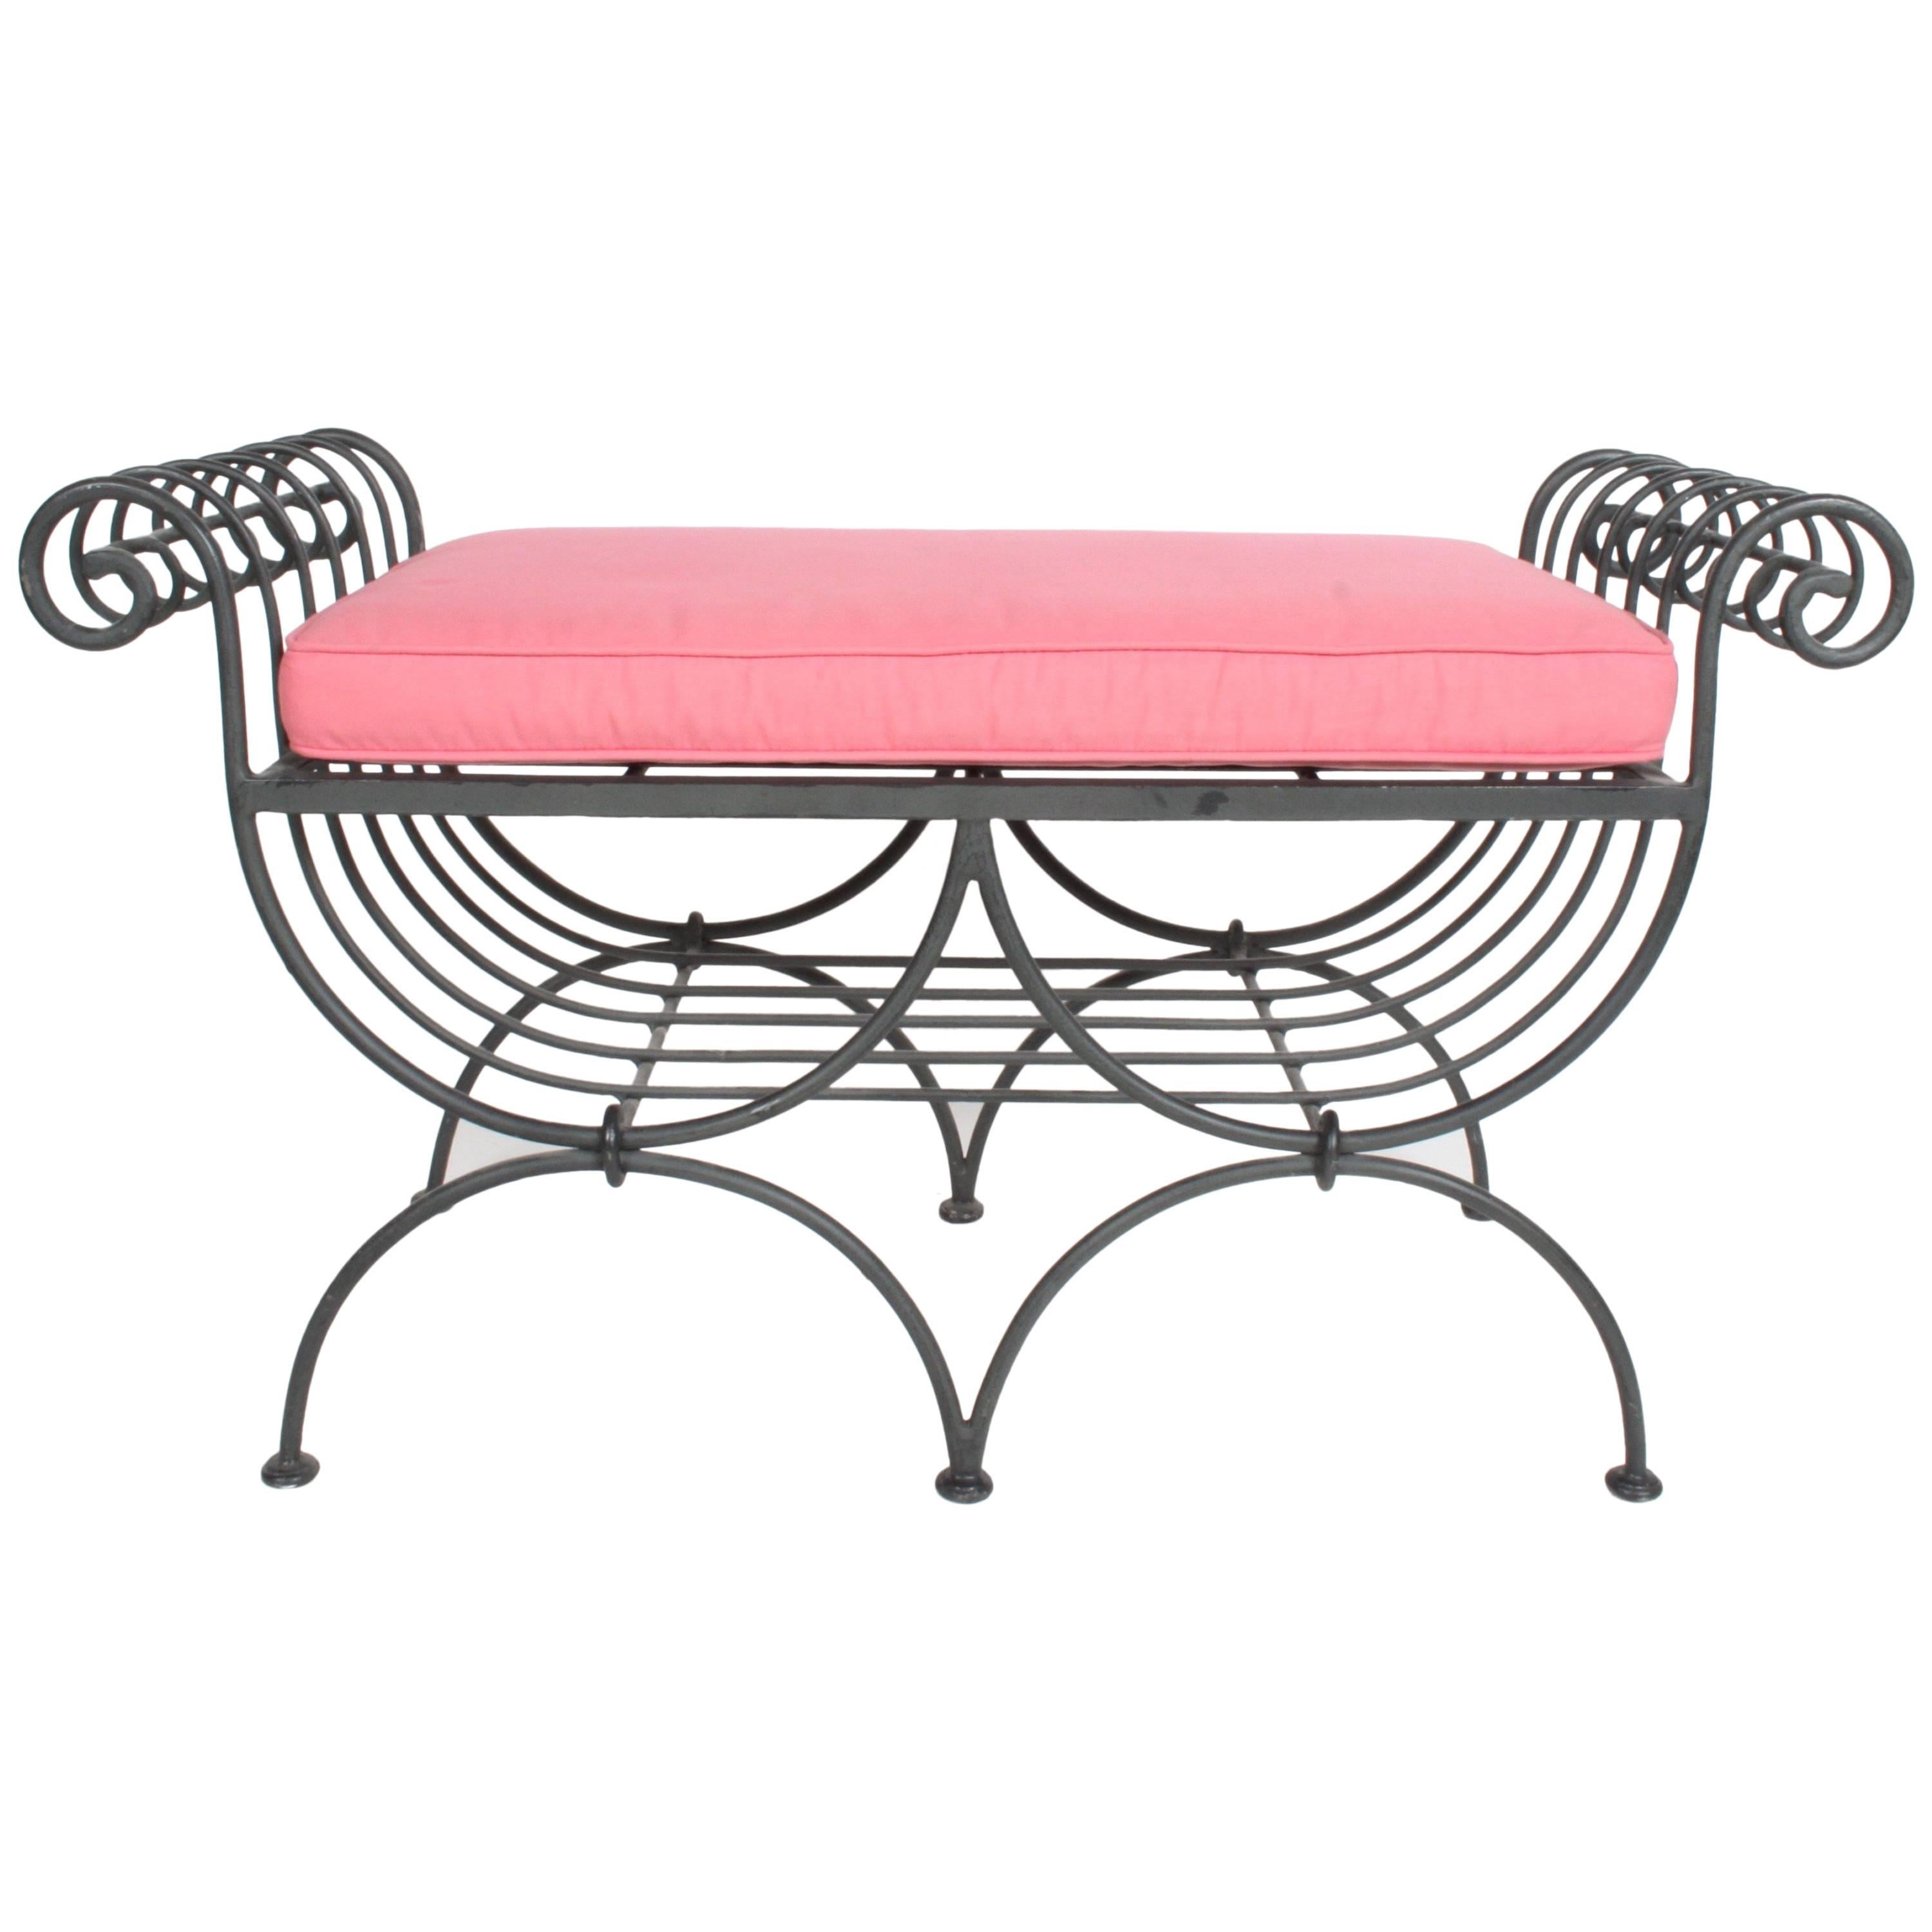 Hollywood Regency Italian Black Wrought Iron Double Scroll Arm Bench - Pink Seat